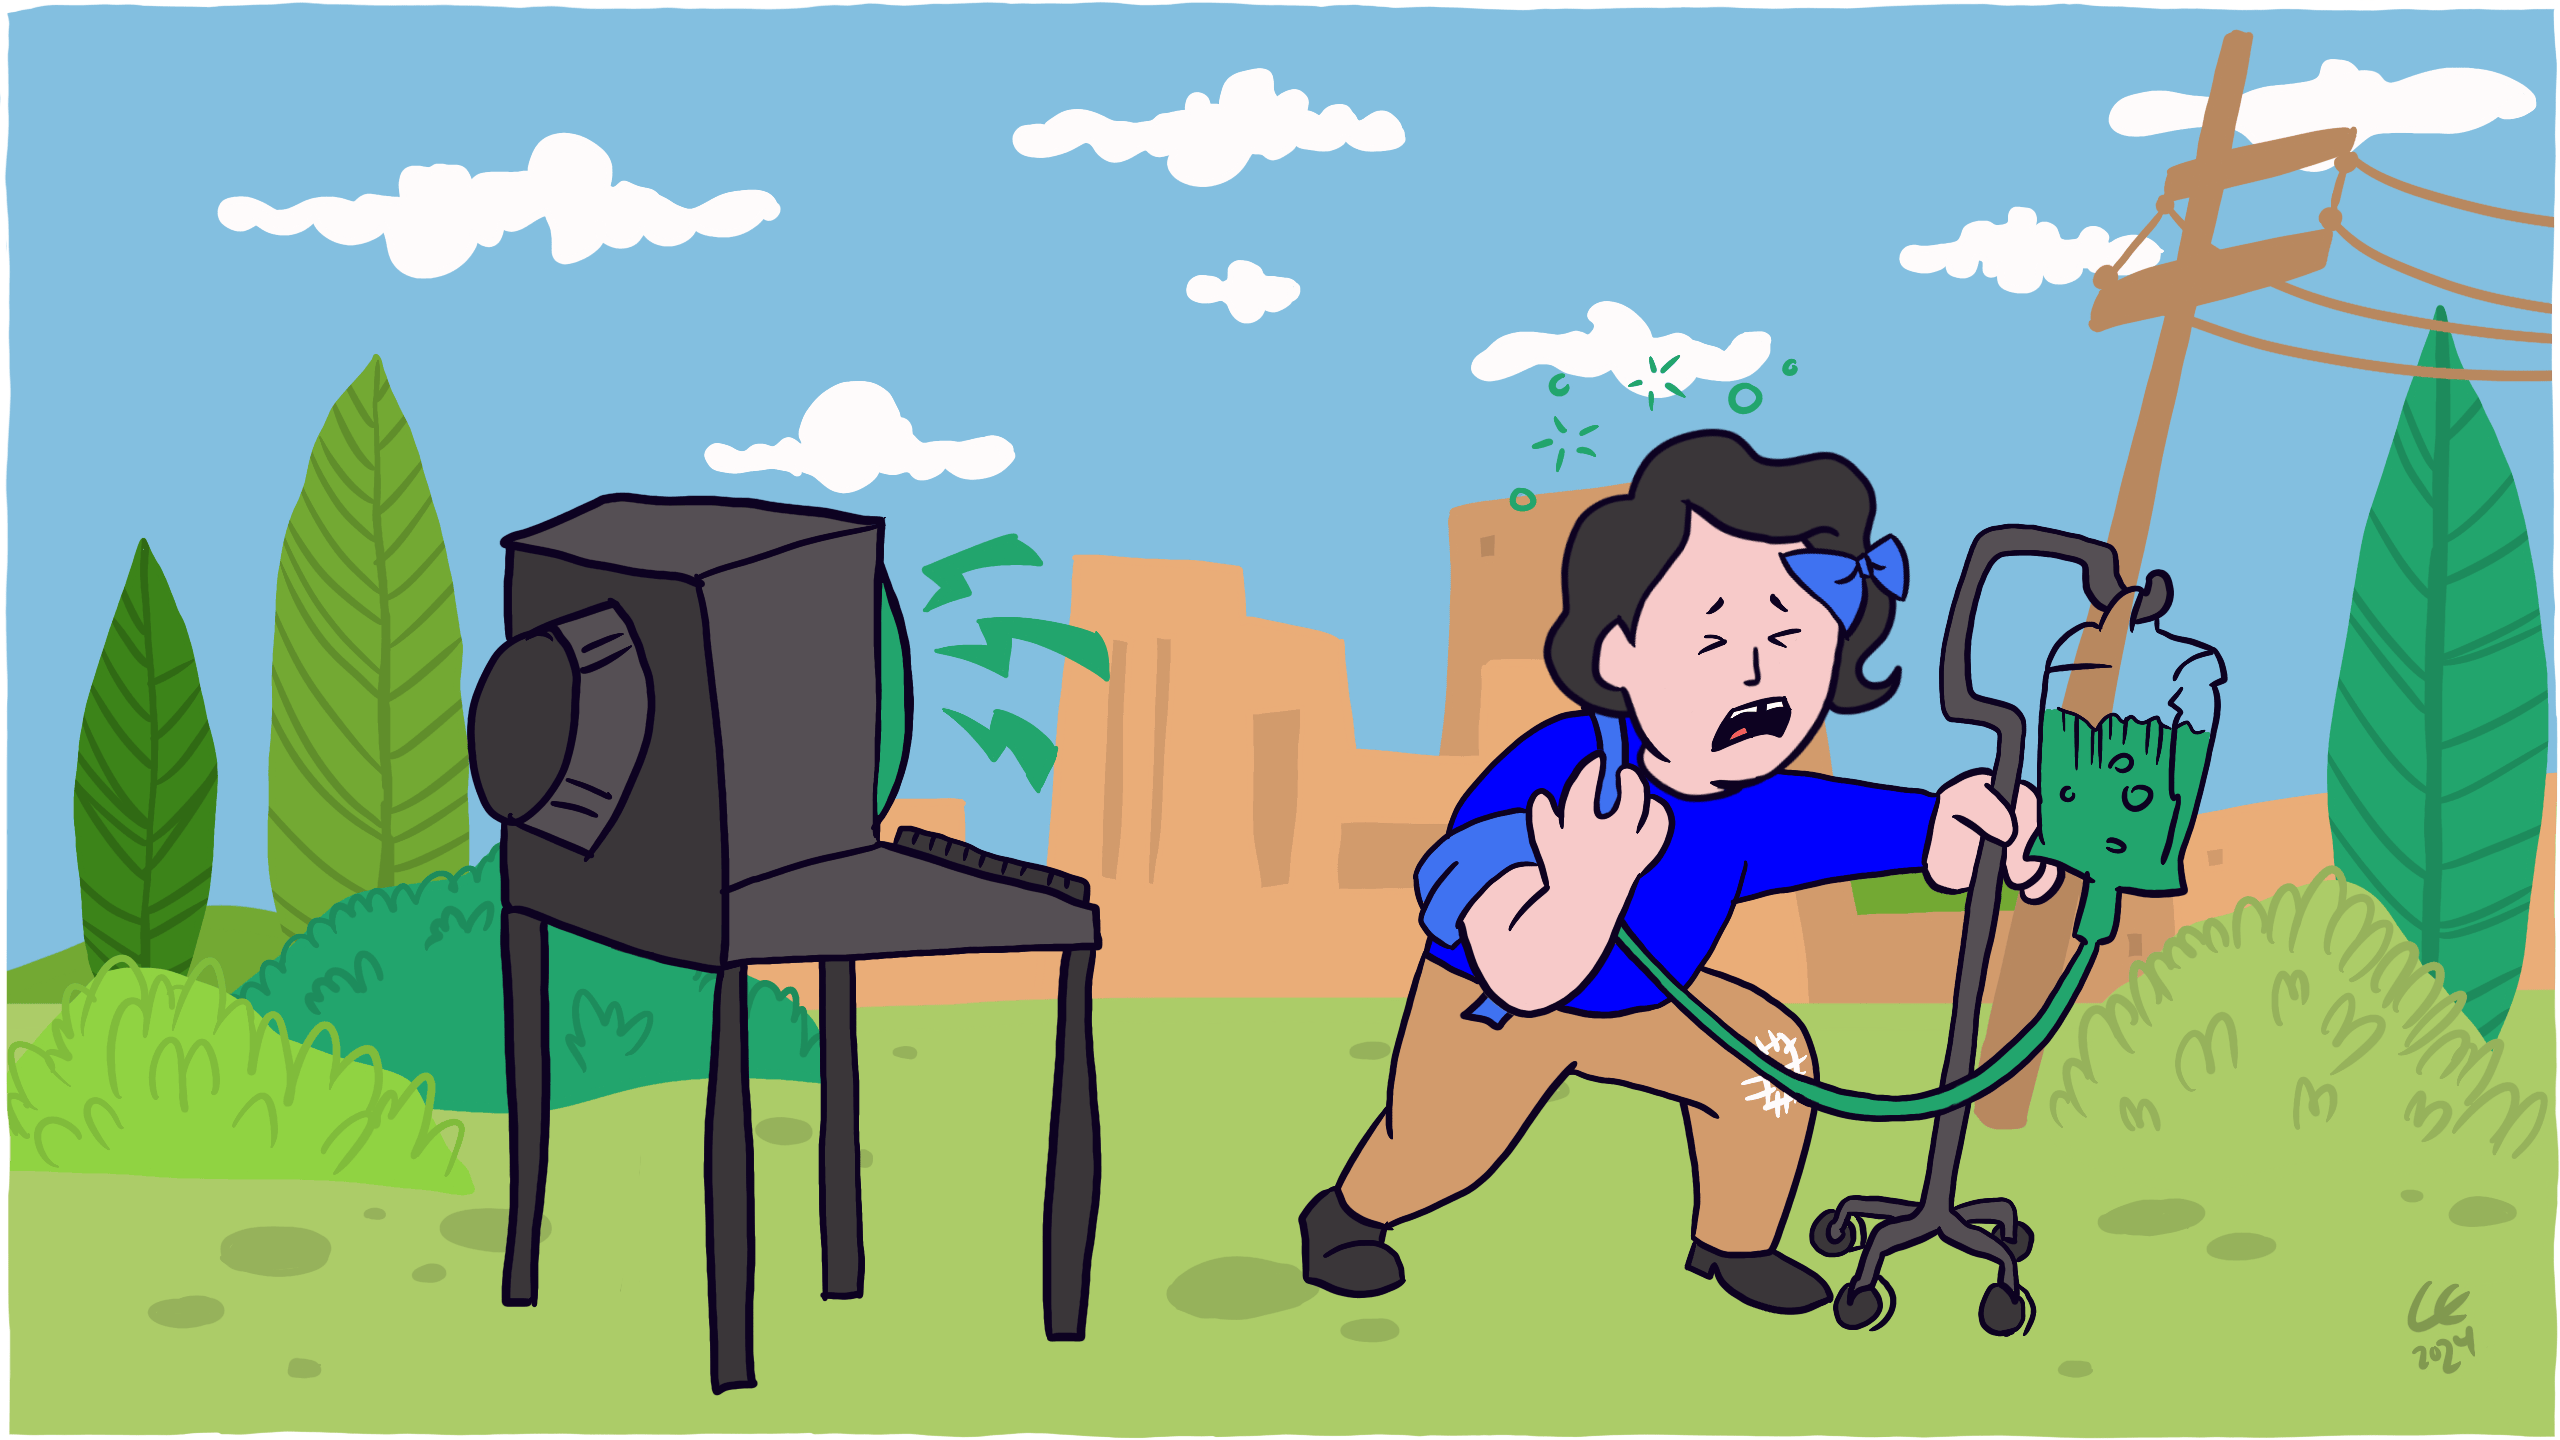 Frankie is walking away from a computer that has administered the wrong amount of medication. Illustration by Carlos Eriksson.